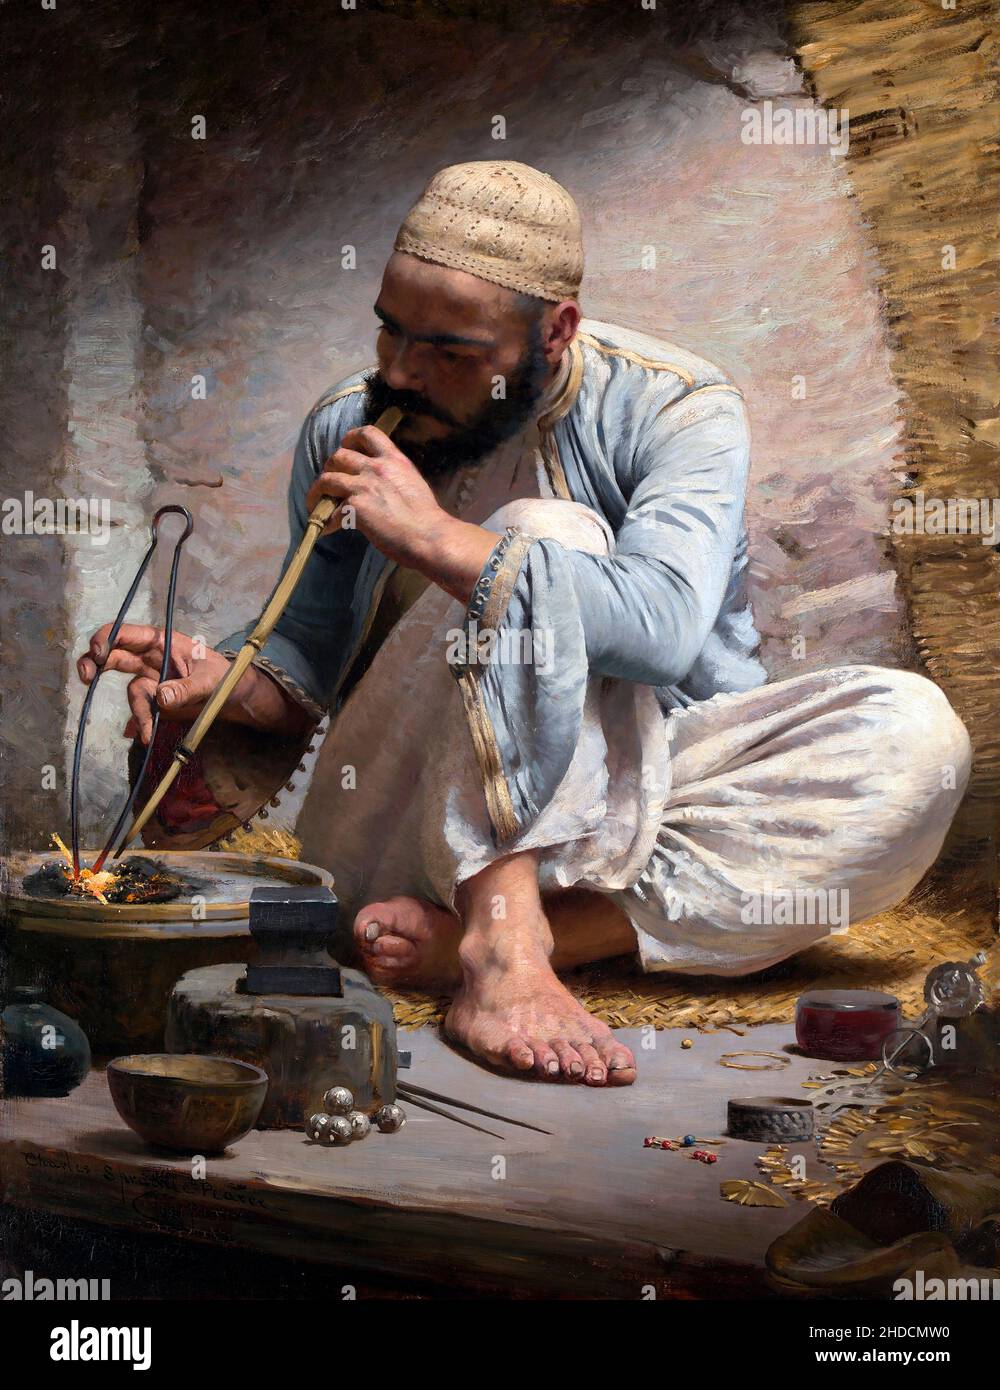 The Arab Jeweler by Charles Sprague Pearce (1851-1914), oil on canvas, c.1882 Stock Photo